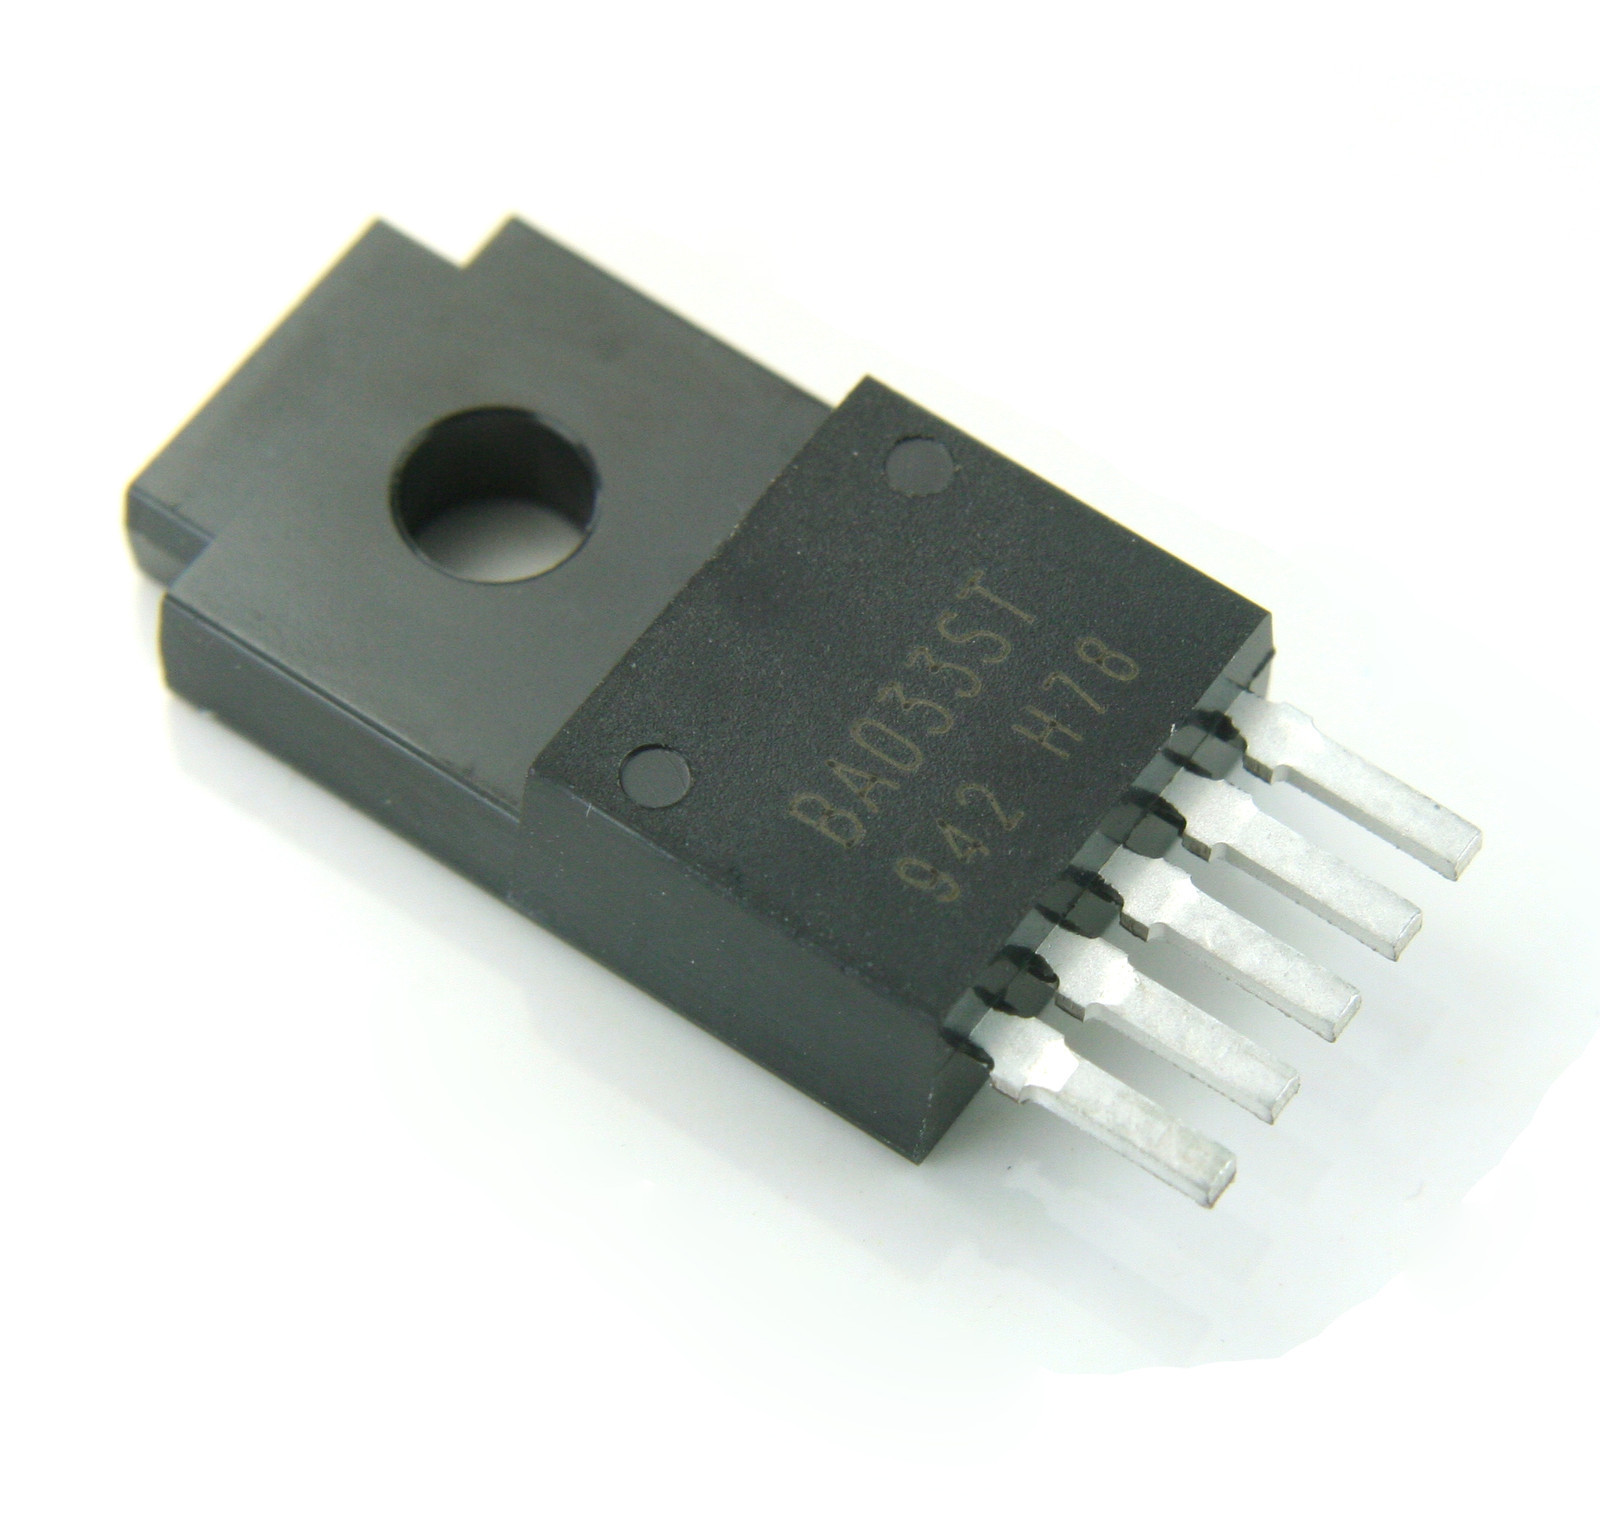 Primary image for 100pcs Rohm LDO Positive Voltage Regulator 3.3V 1A (5-PIN +TAB) TO-220FP BA033ST